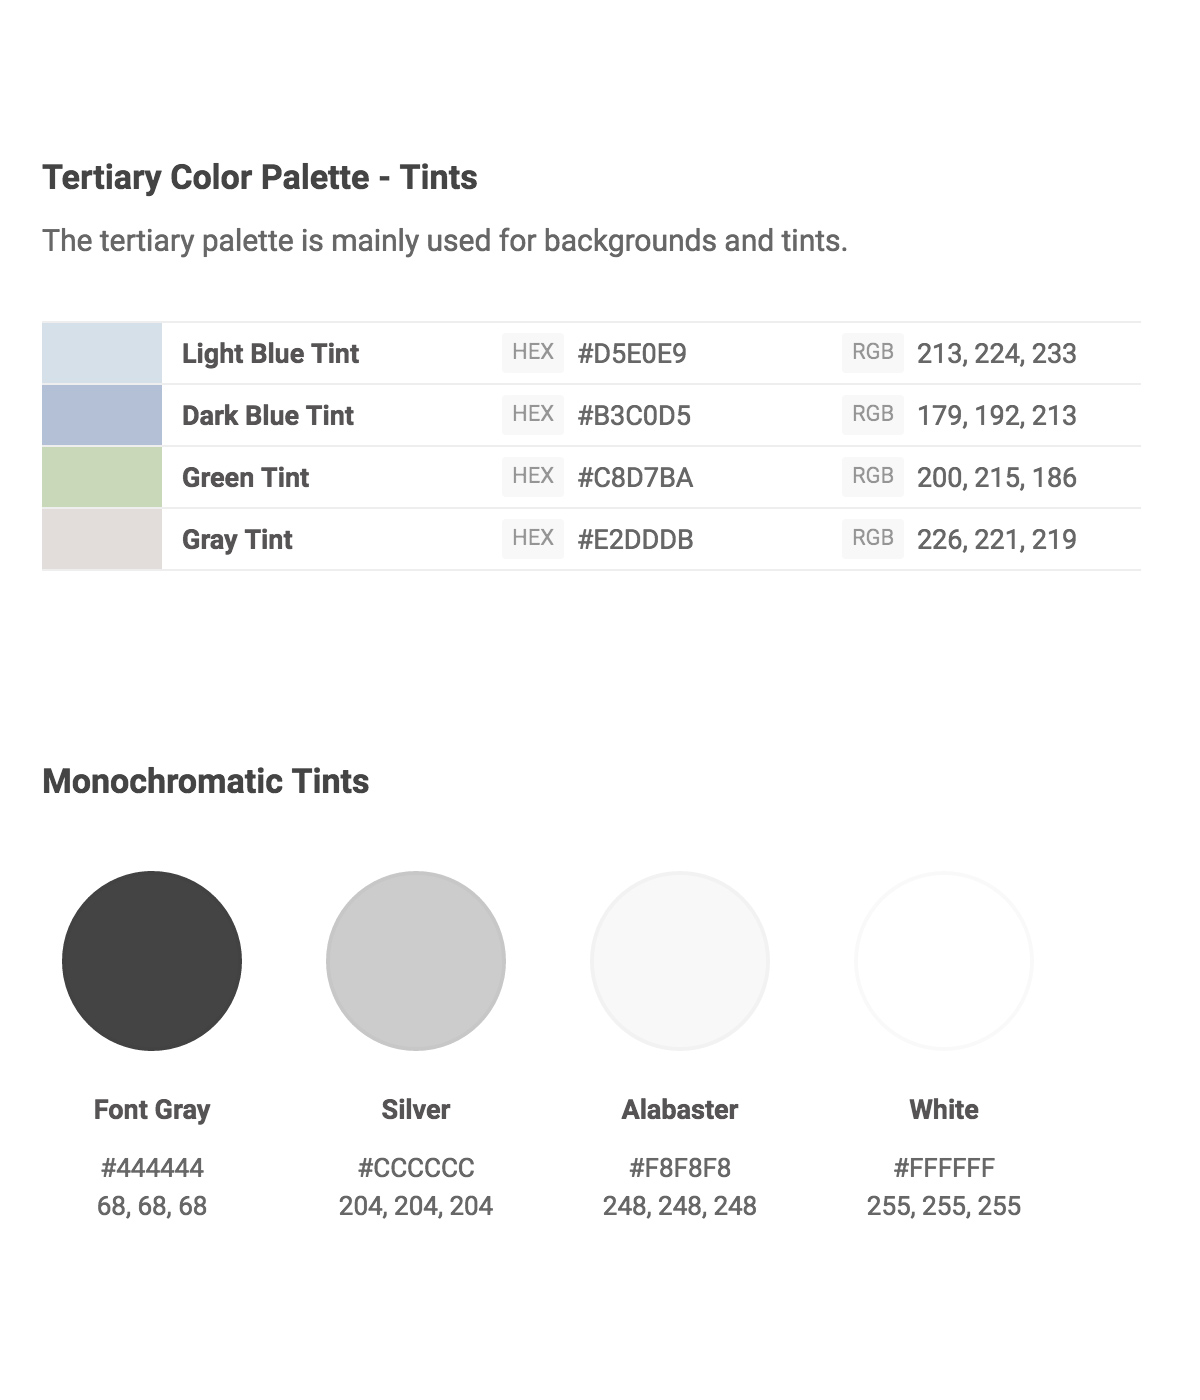 Tertiary colors and tints